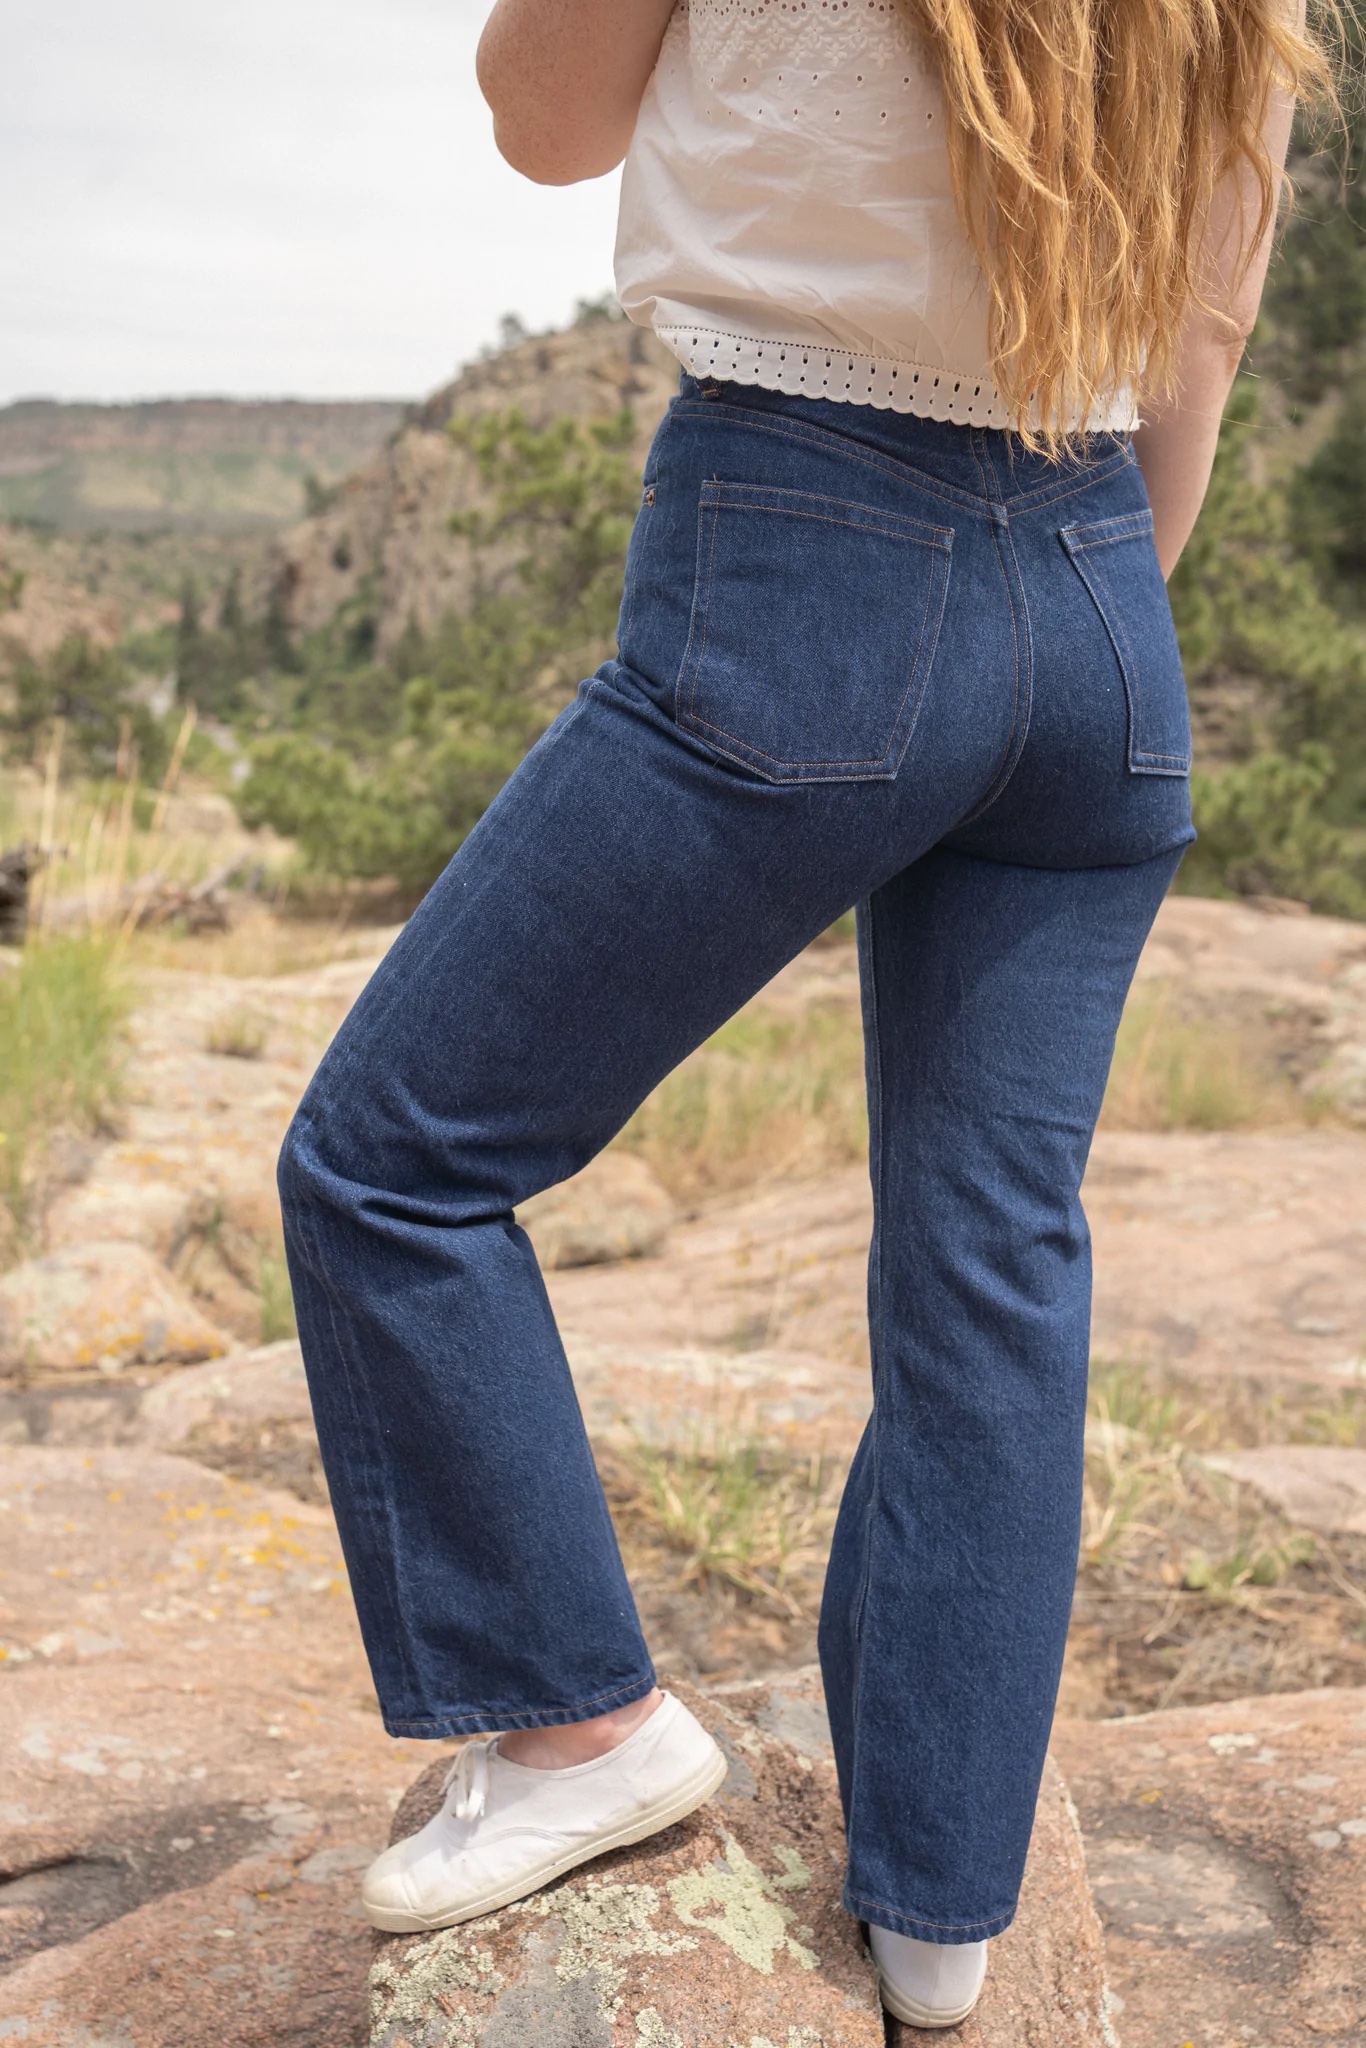 Top 10 Indie Jeans Sewing Patterns - The Fold Line